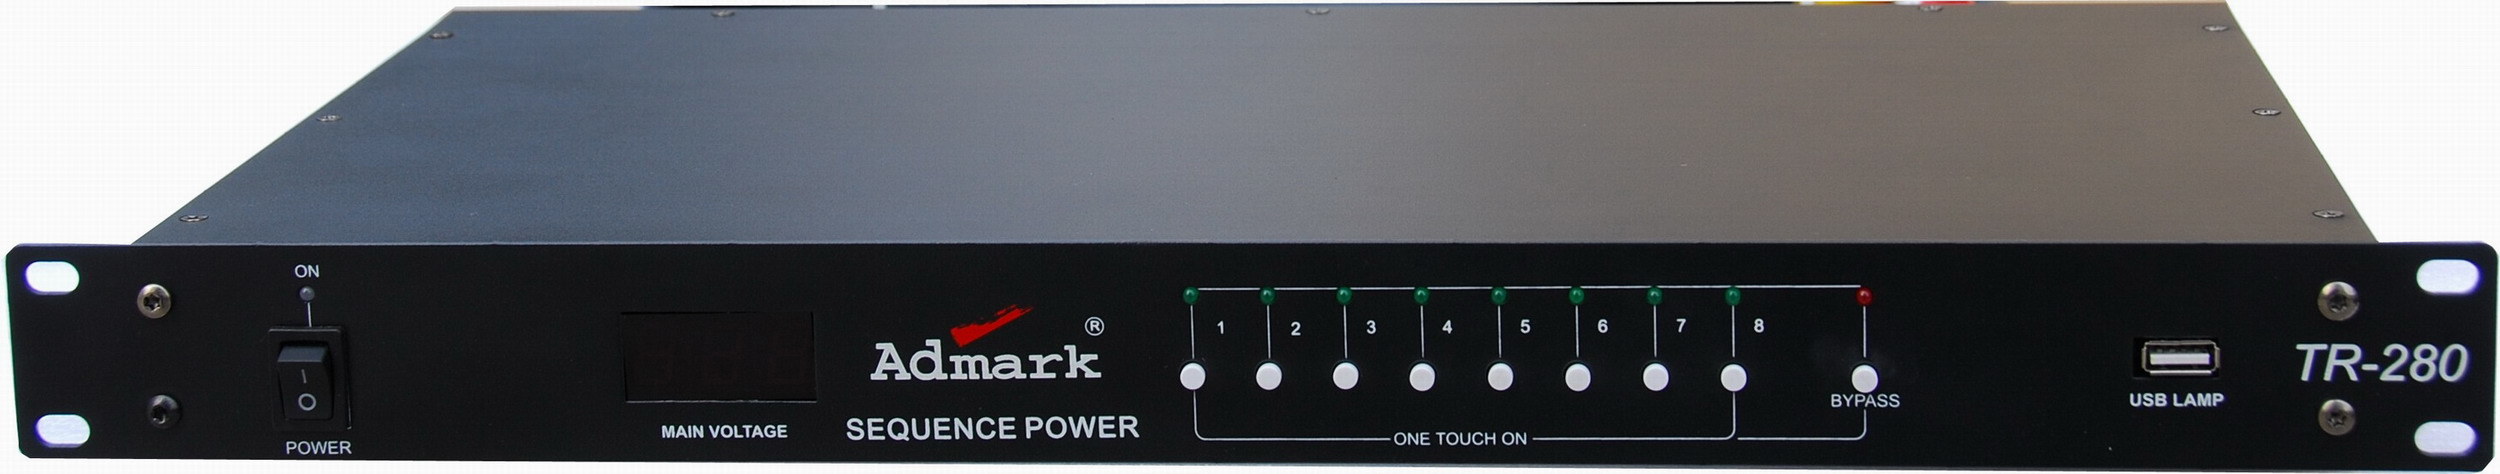 Sequence Power Audio (TR-280)